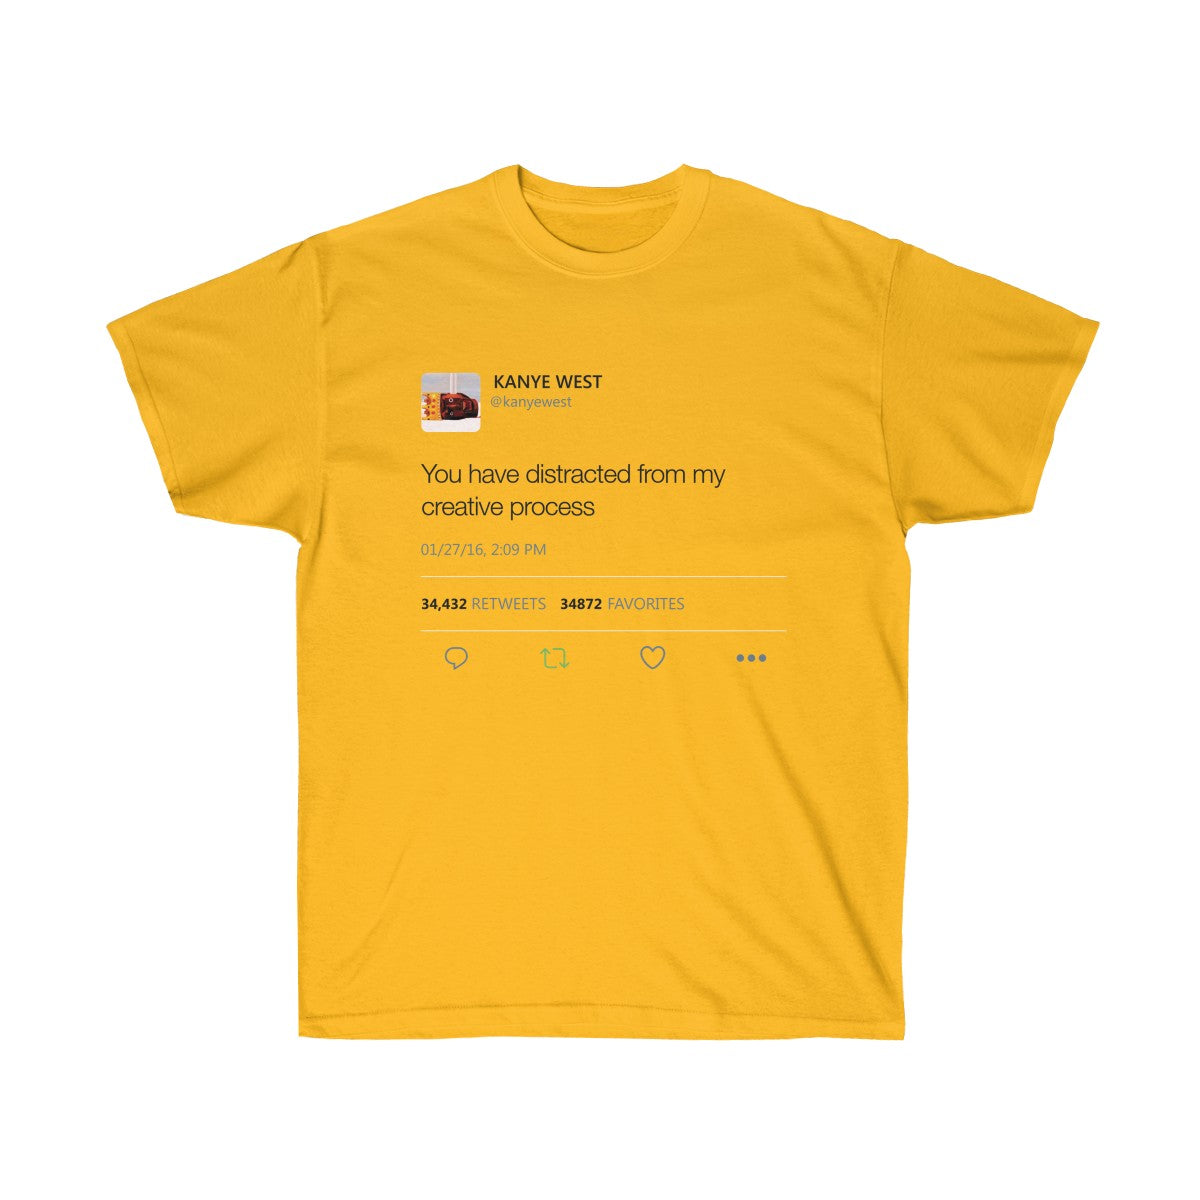 You have distracted from my creative process - Kanye West Tweet T-Shirt-Gold-S-Archethype